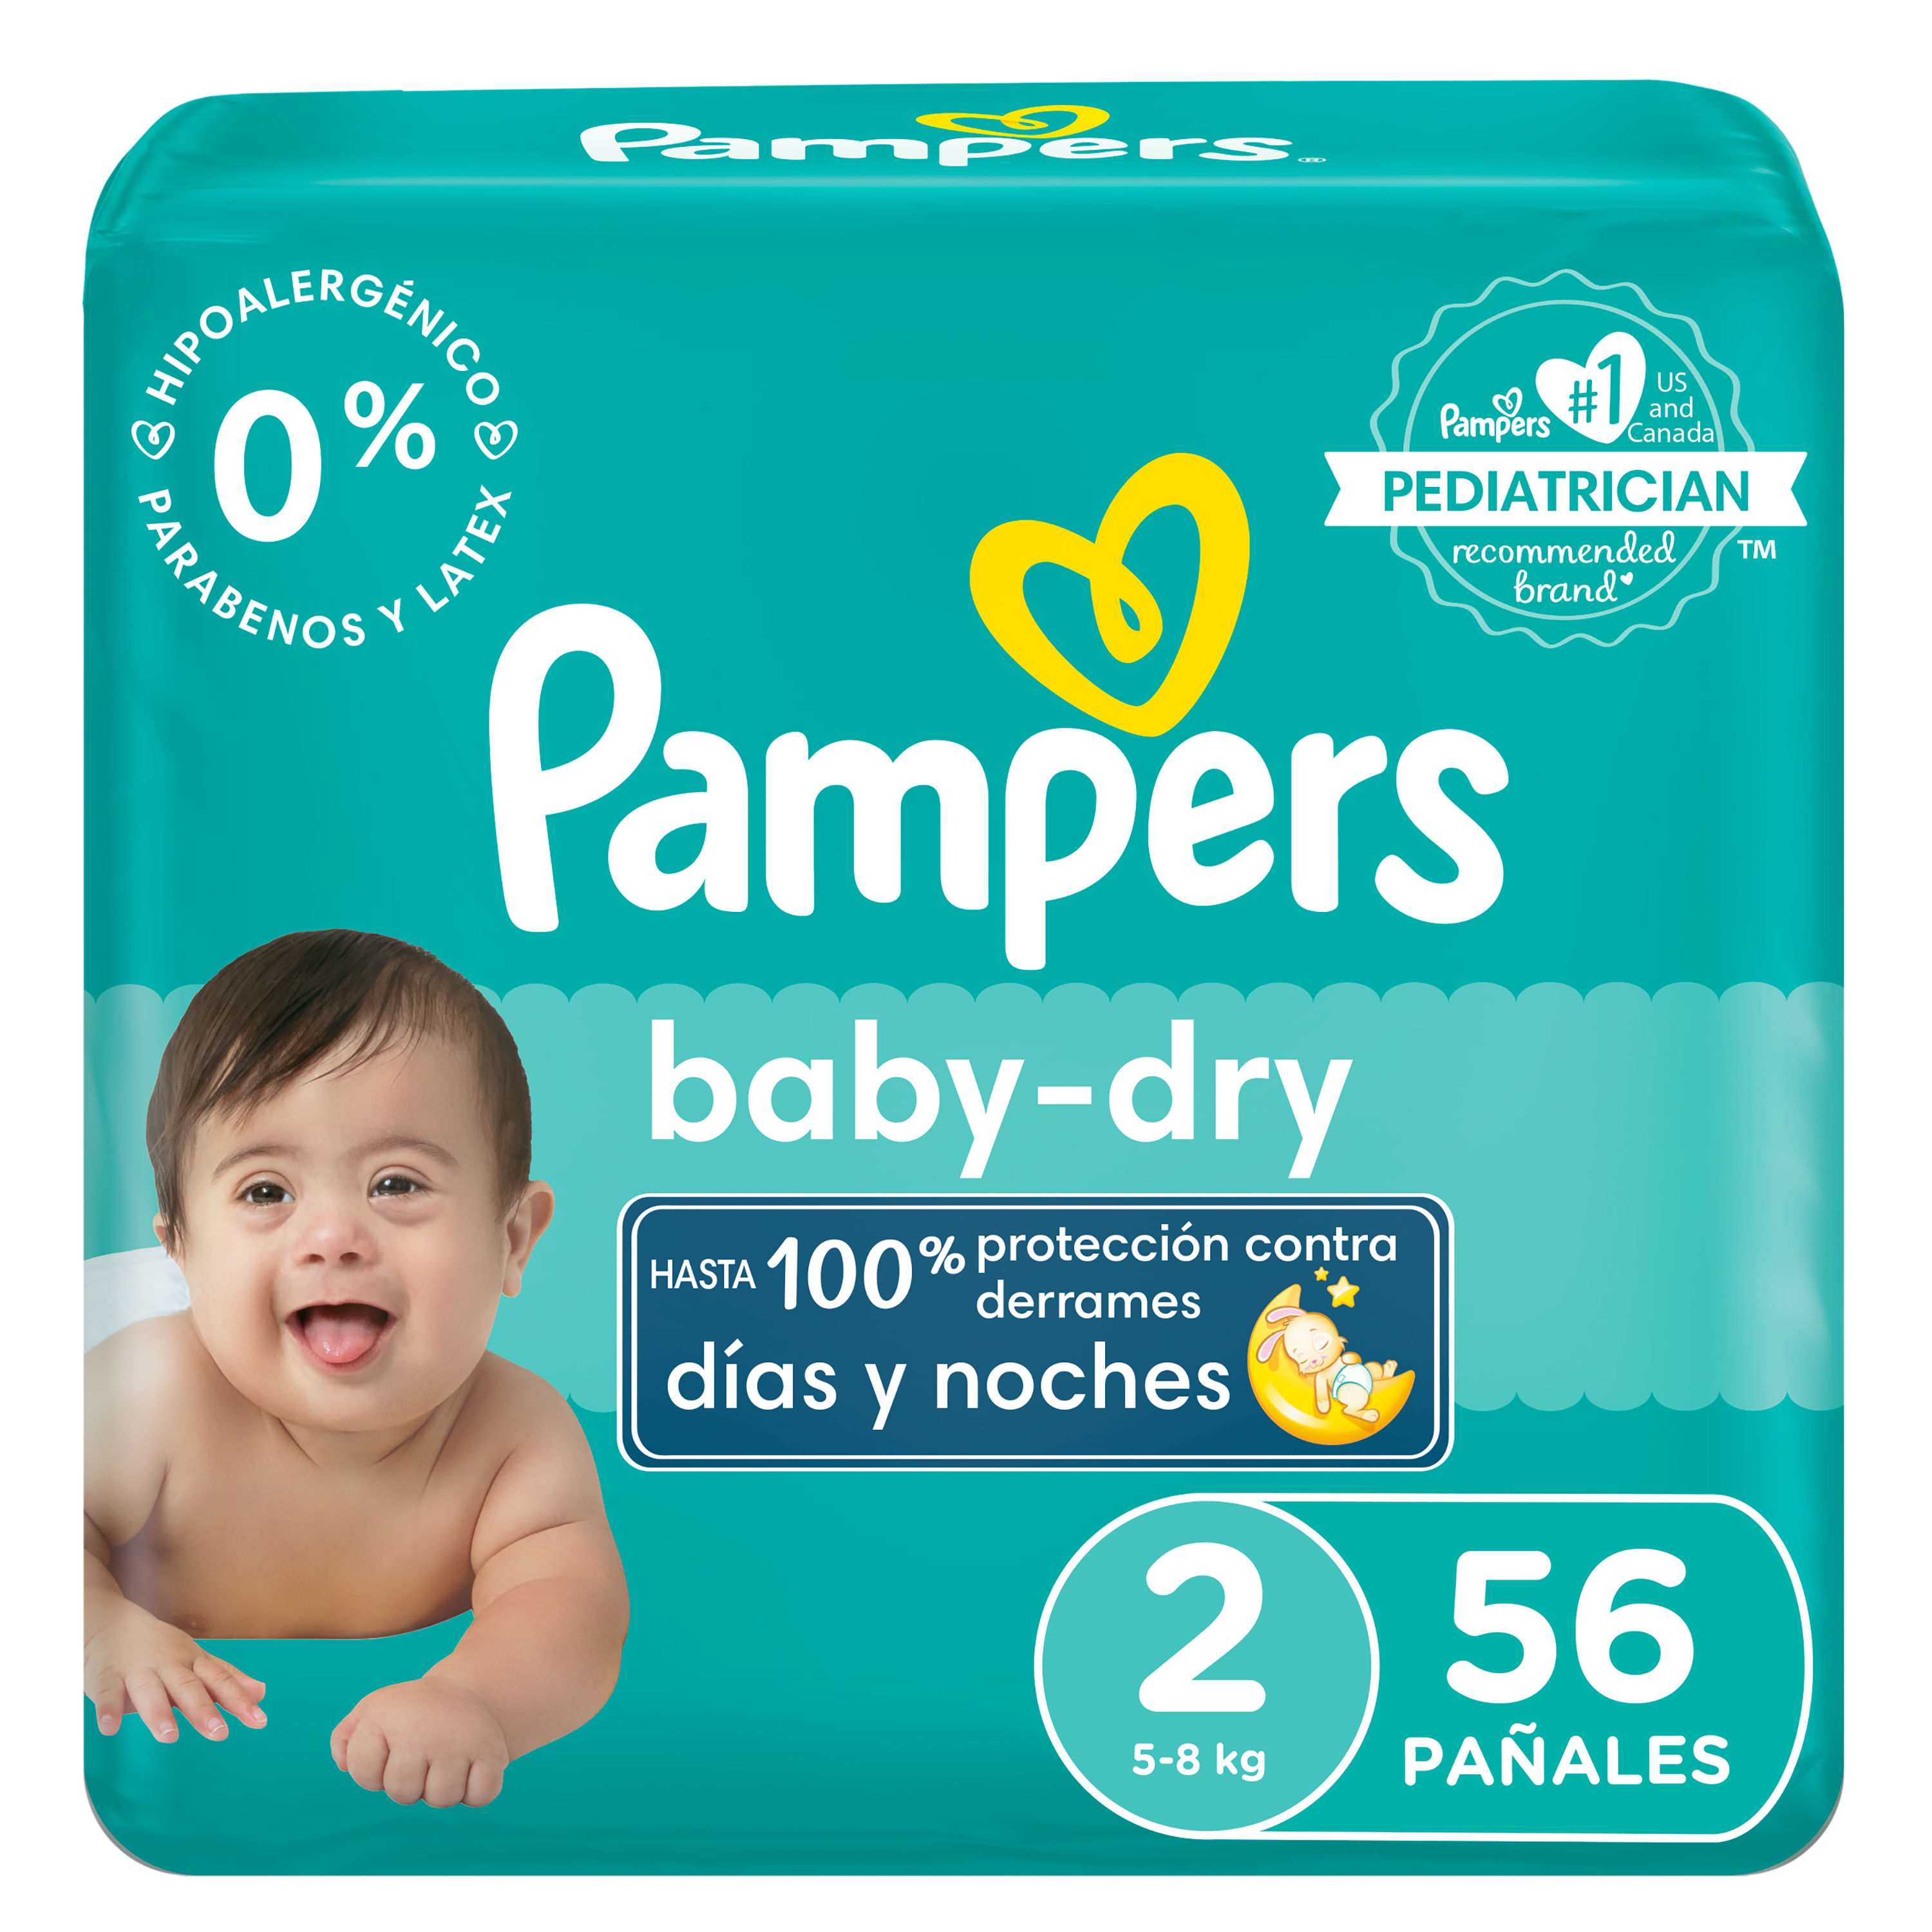 Pampers Baby Dry Pañales Talla 2 (12 a 18 lbs) 1x112 unds Caja